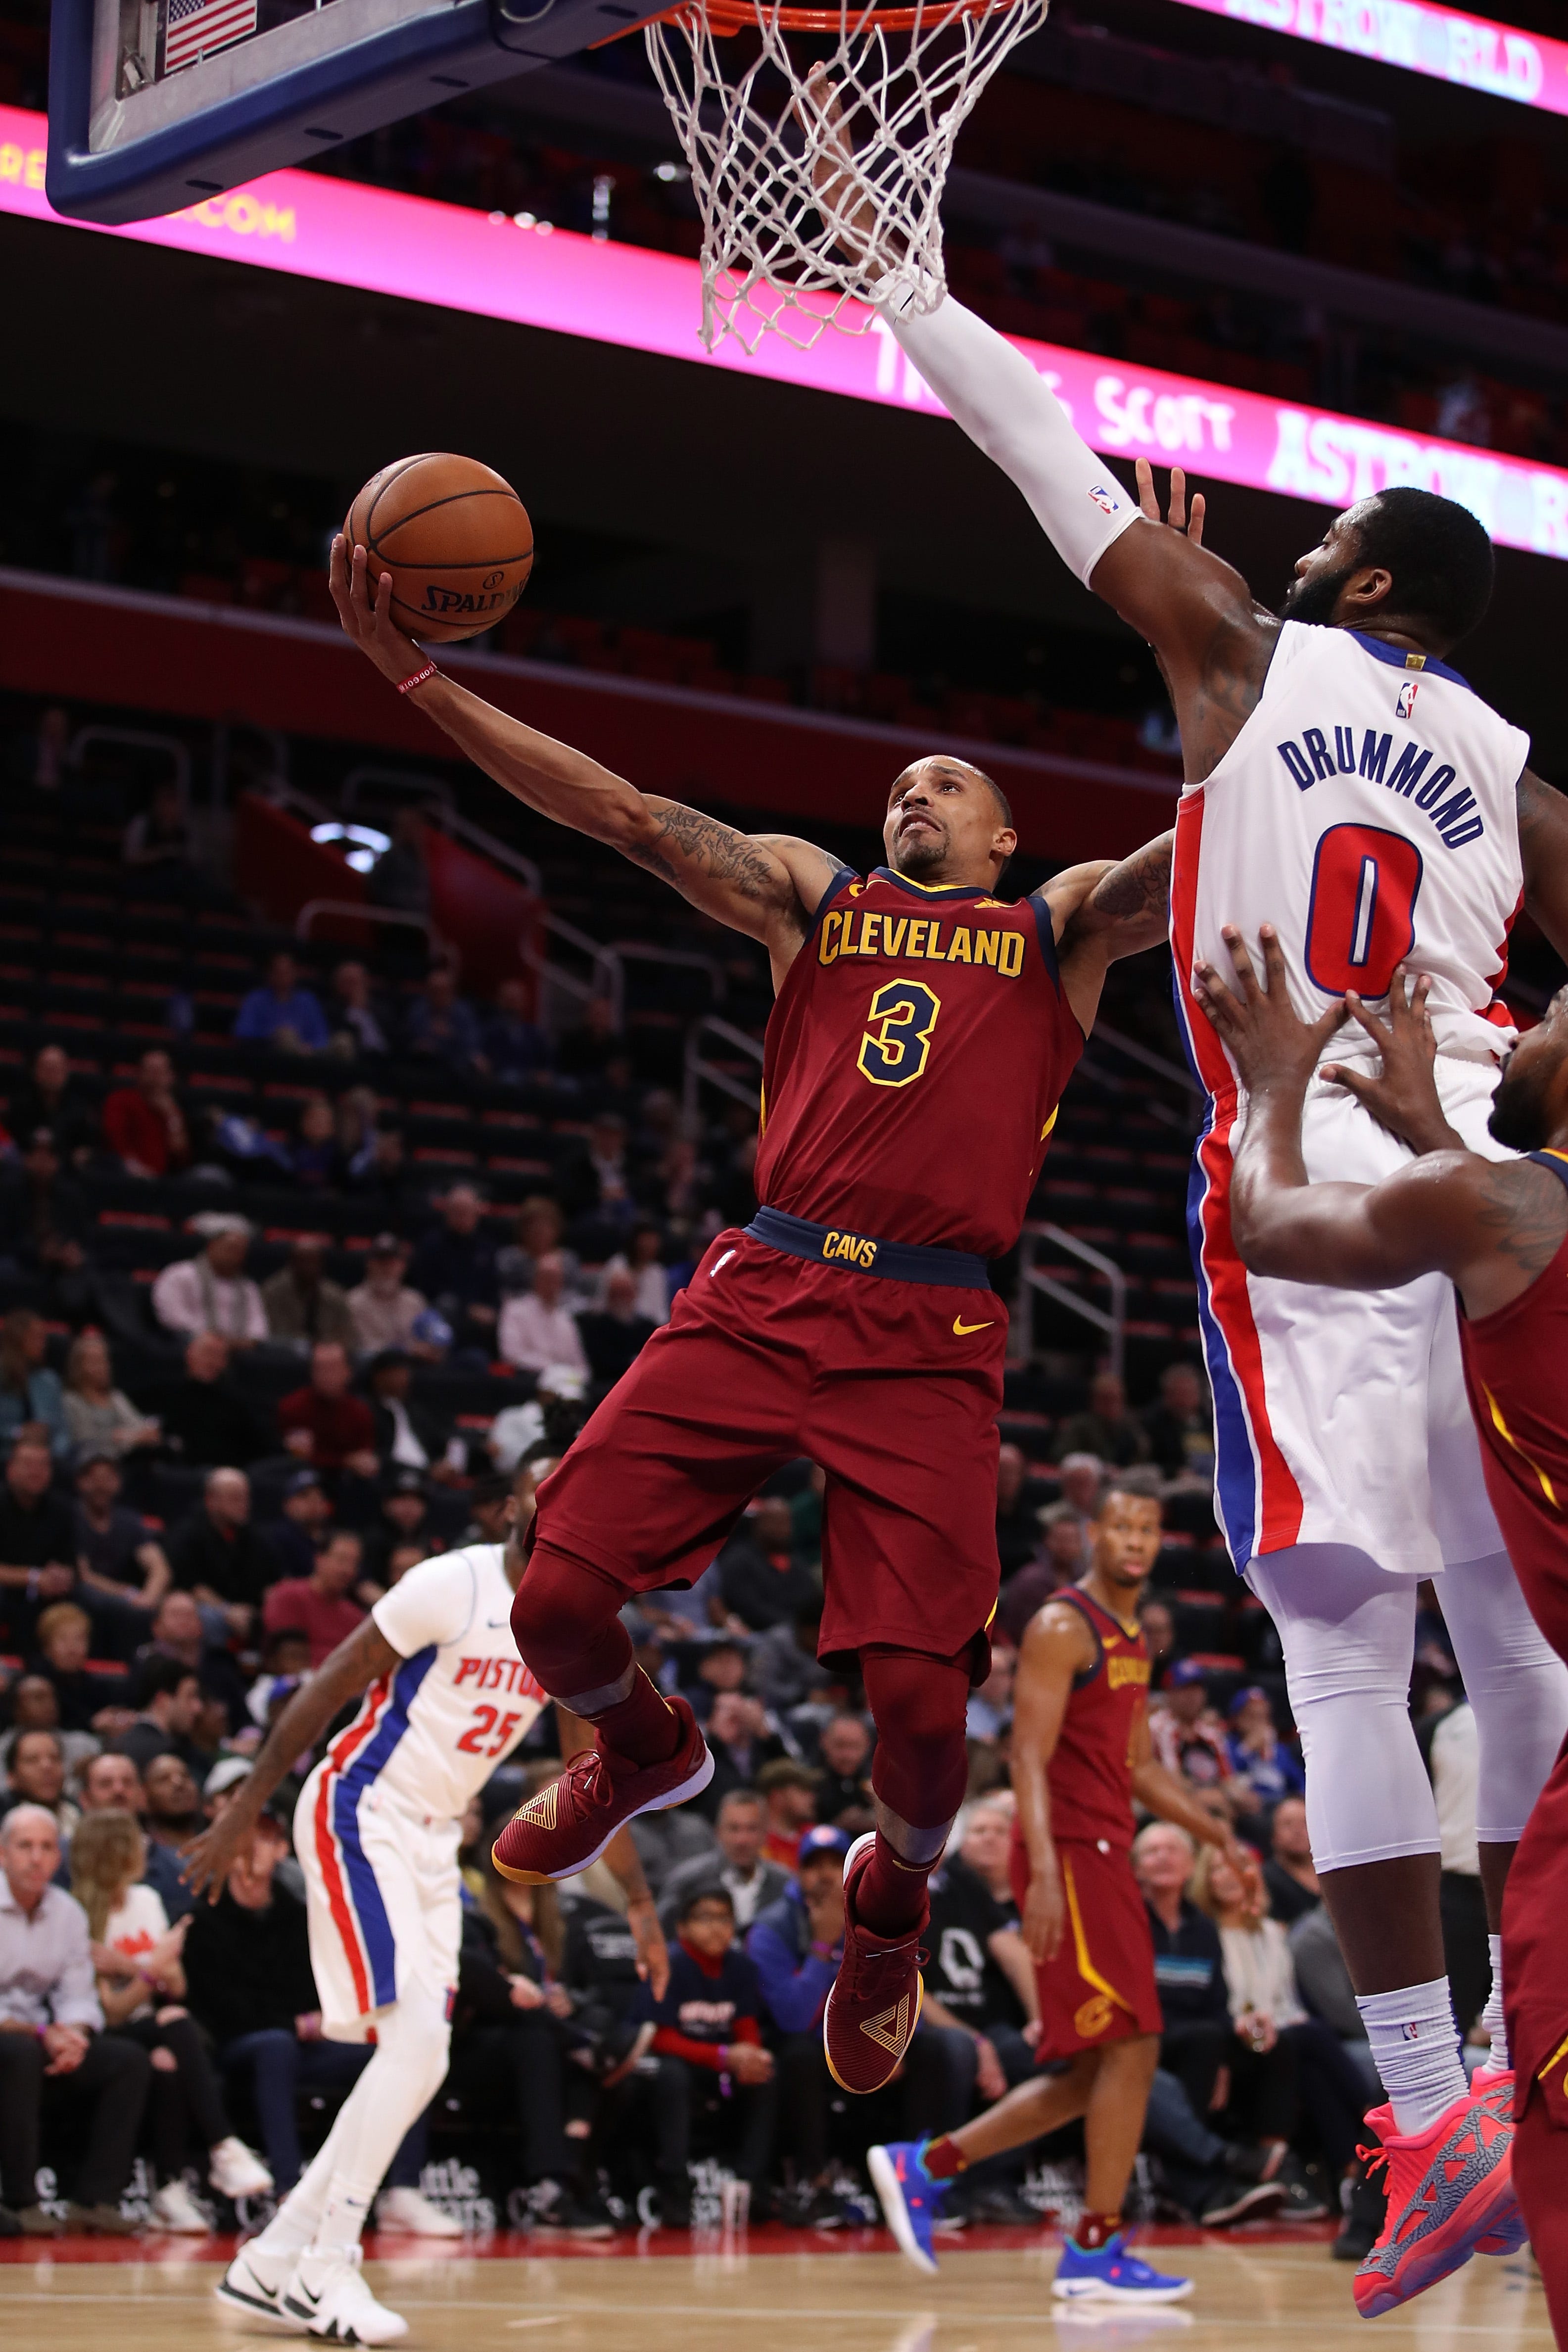 George Hill (3) of the Cleveland Cavaliers drives to the basket past Andre Drummond (0) of the Detroit Pistons during the first half.